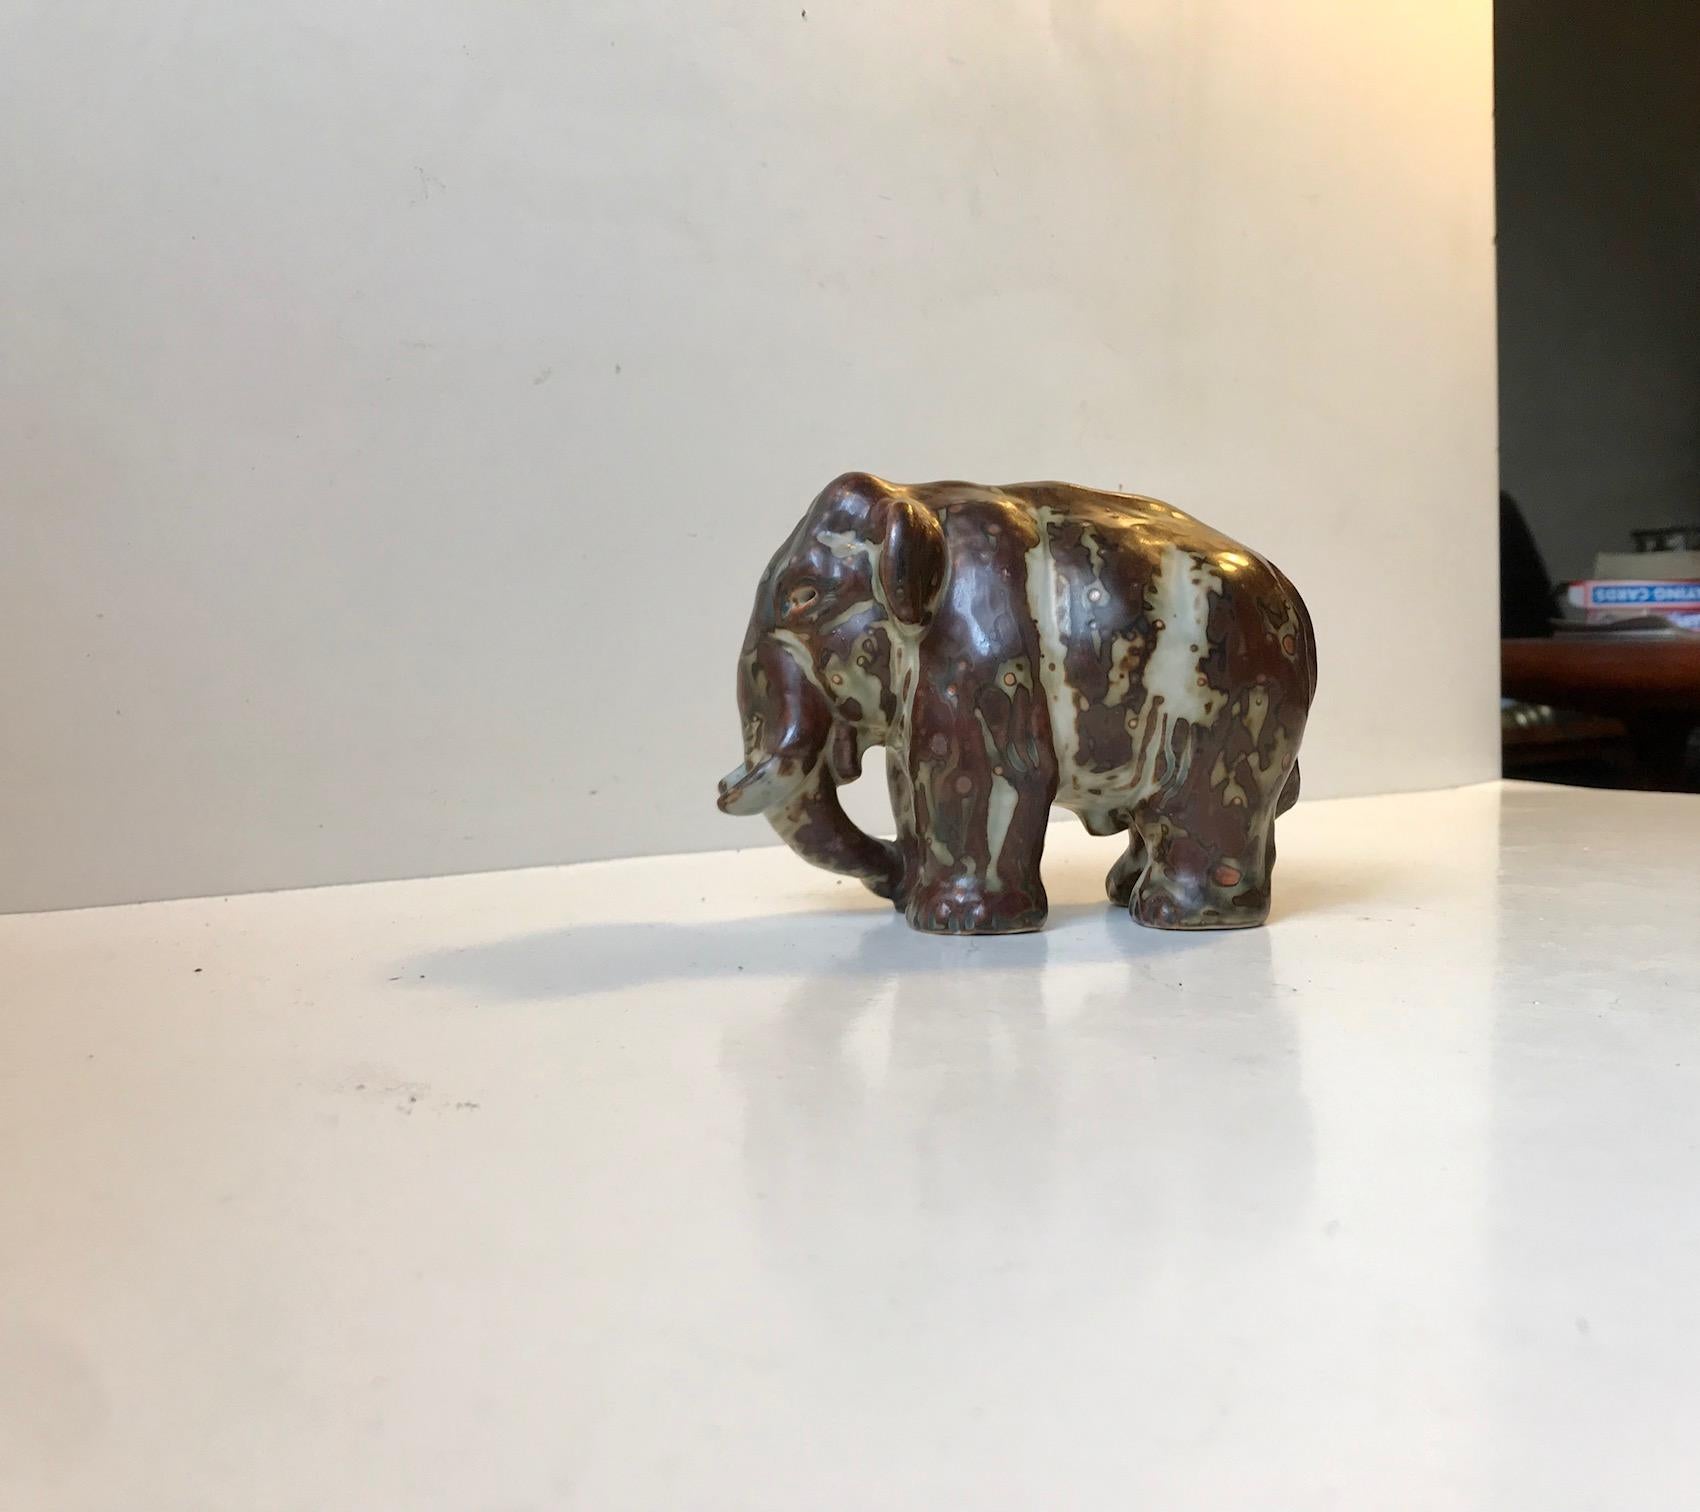 This series of elephants and mammoths was designed by the Danish ceramist Knud Kyhn (KK) all the way back in 1929. Hugely inspired by the sung glazes applied in Axel Salto's and Bode Willumsen's designs these naturalistic figurines became popular